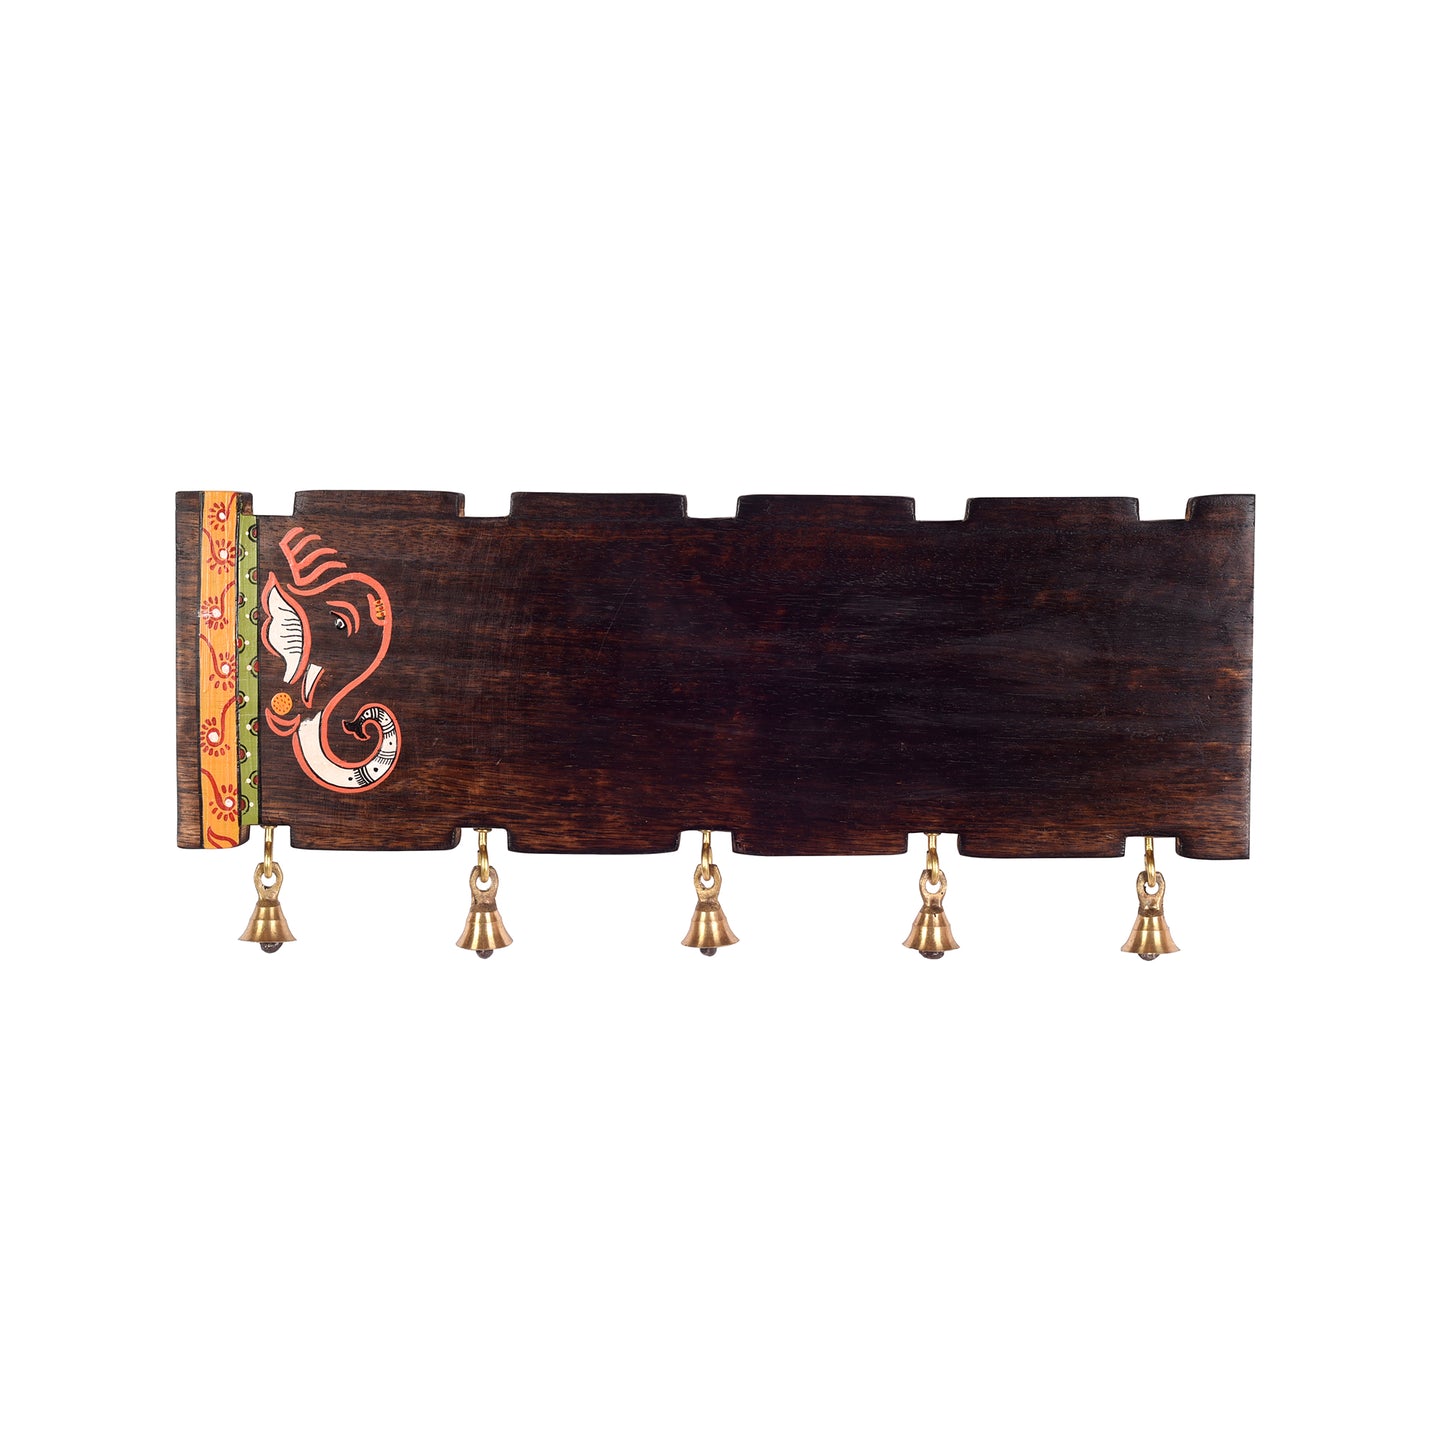 Shri Ganesh Name Plate for Home (With Name) (15x0.5x5)